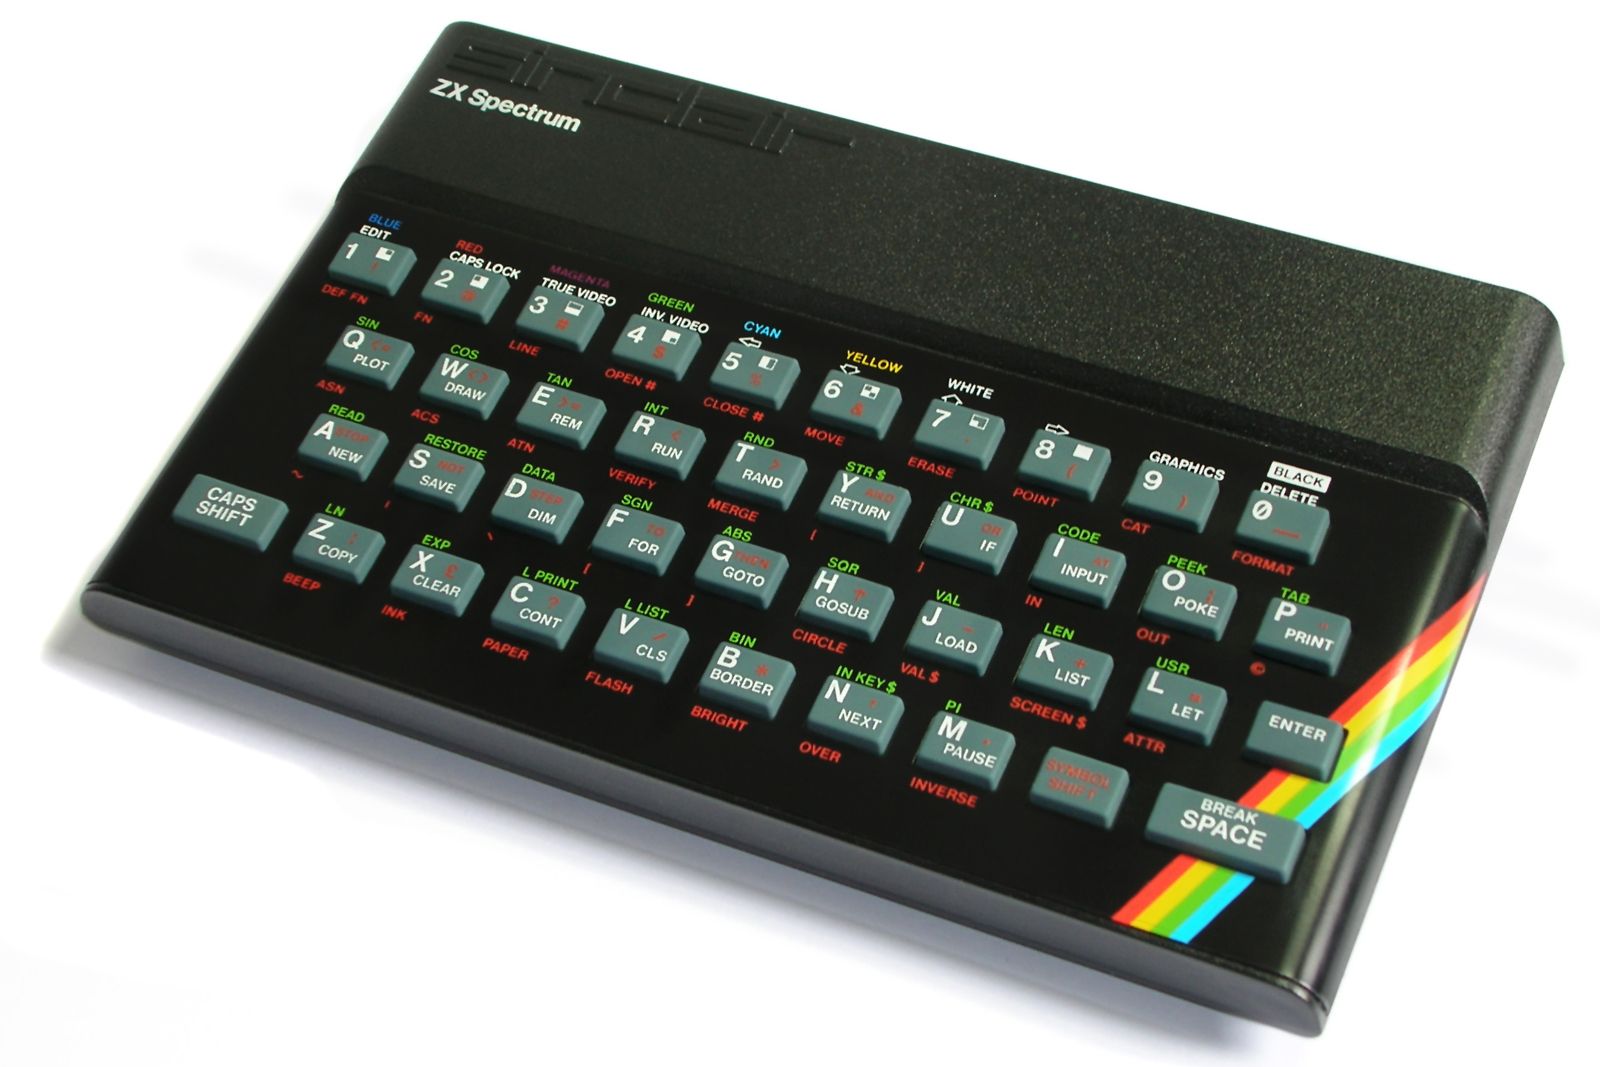 12 best 1980s gadgets that defined a decade image 2